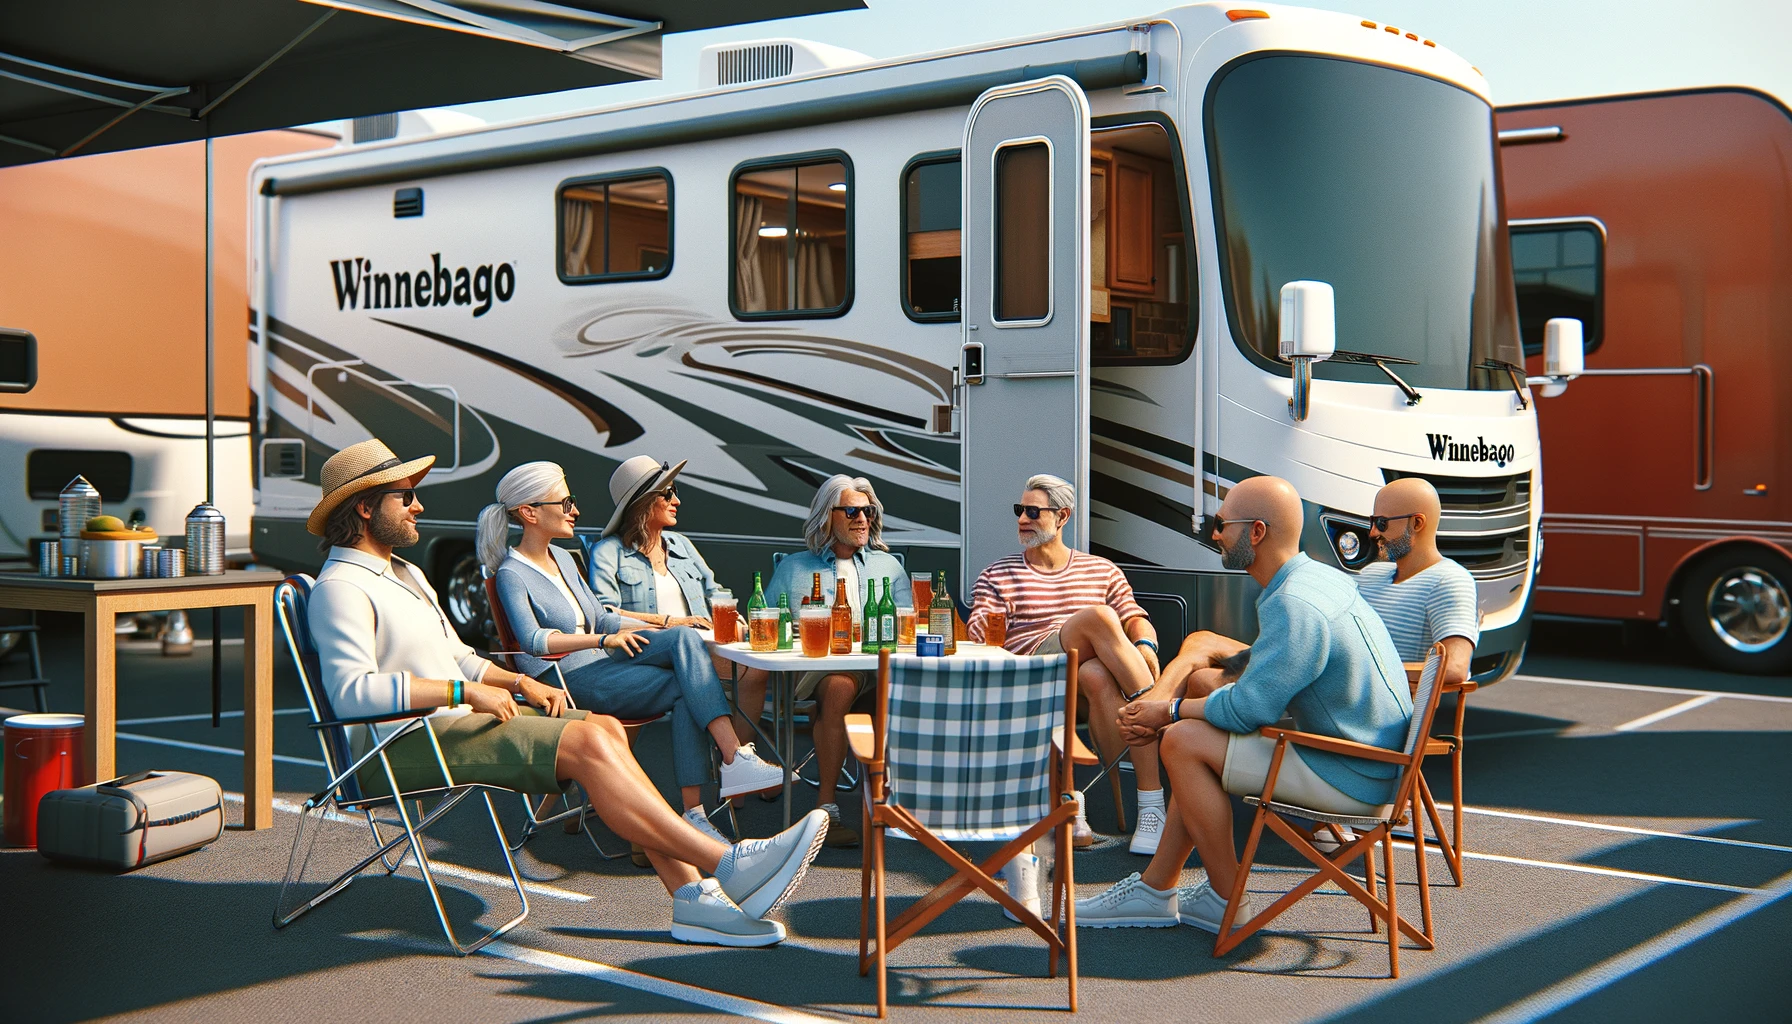 Clients sitting around the Winnebago relaxing at Le Mans